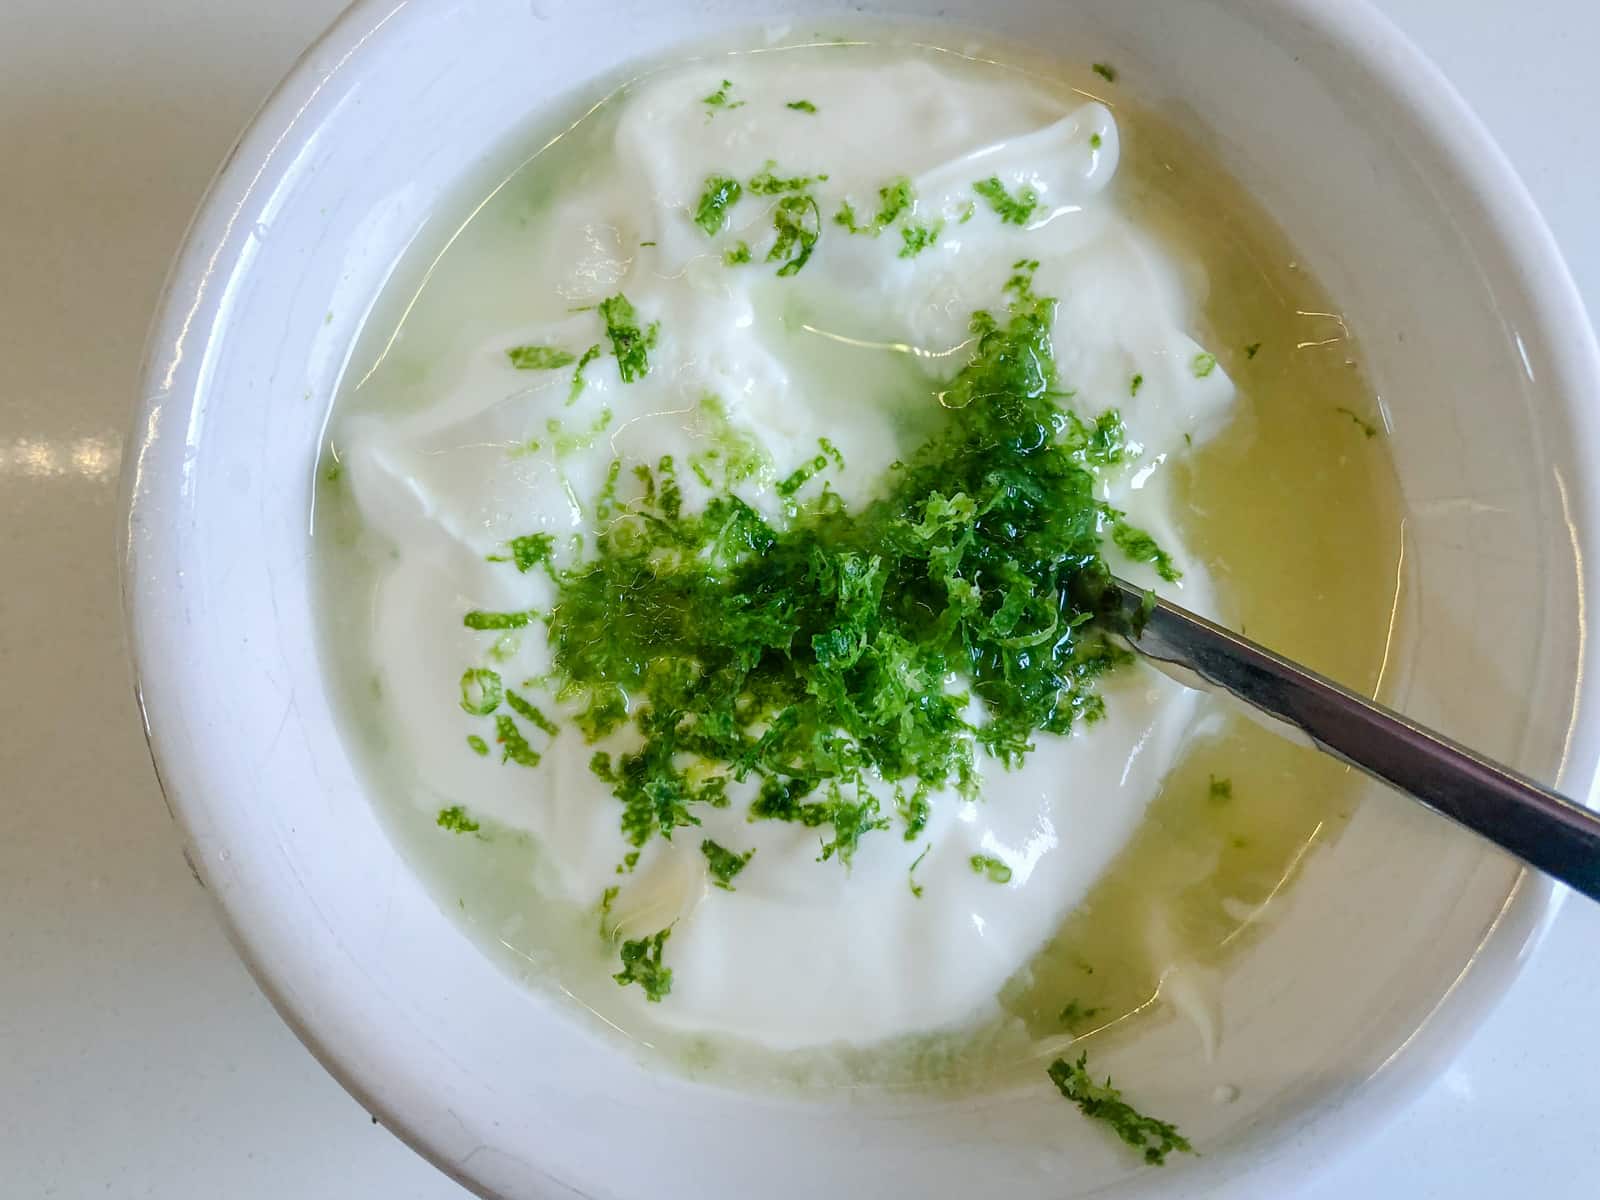 Lime zest and juice added to soured cream.